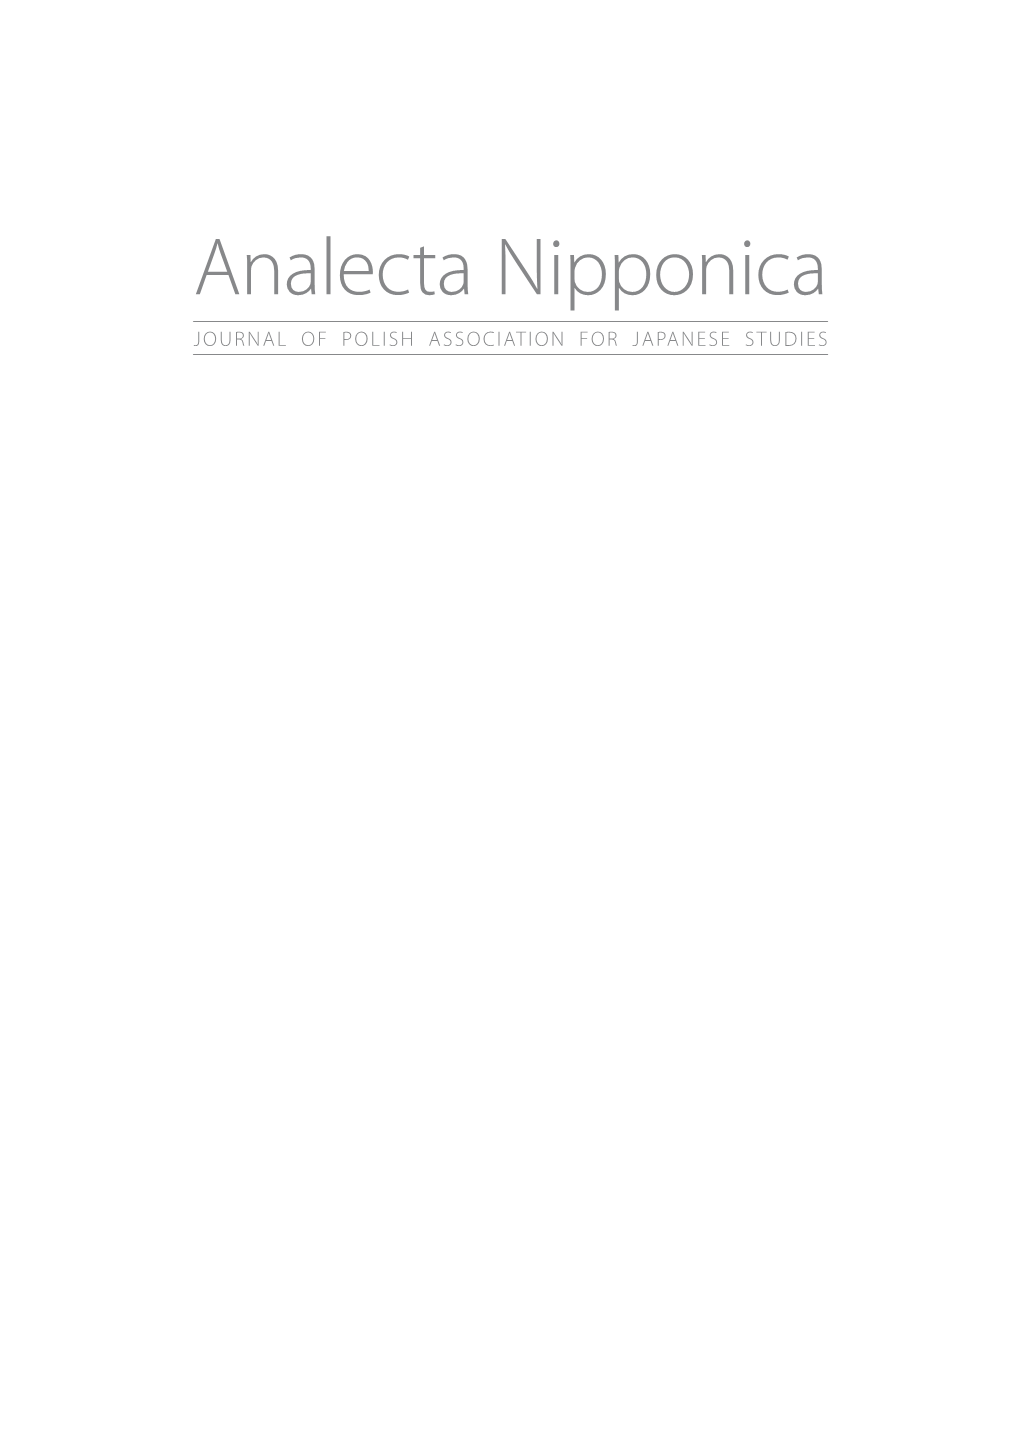 Analecta Nipponica Journal of Polish Association for Japanese Studies